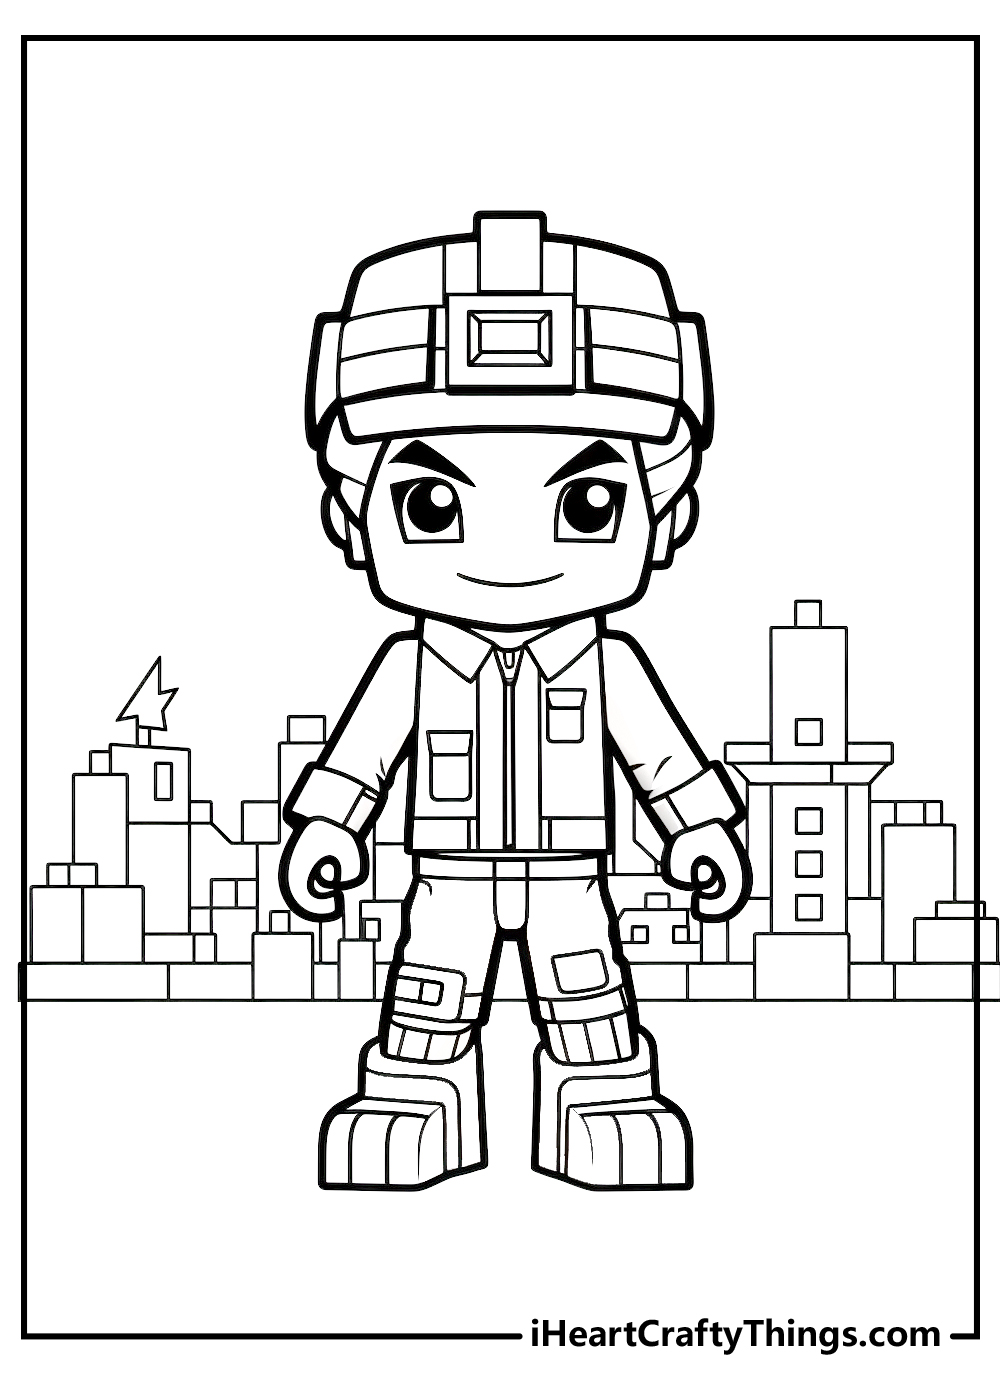 Discover Fun and Excitement with Piggy Roblox Coloring Pages